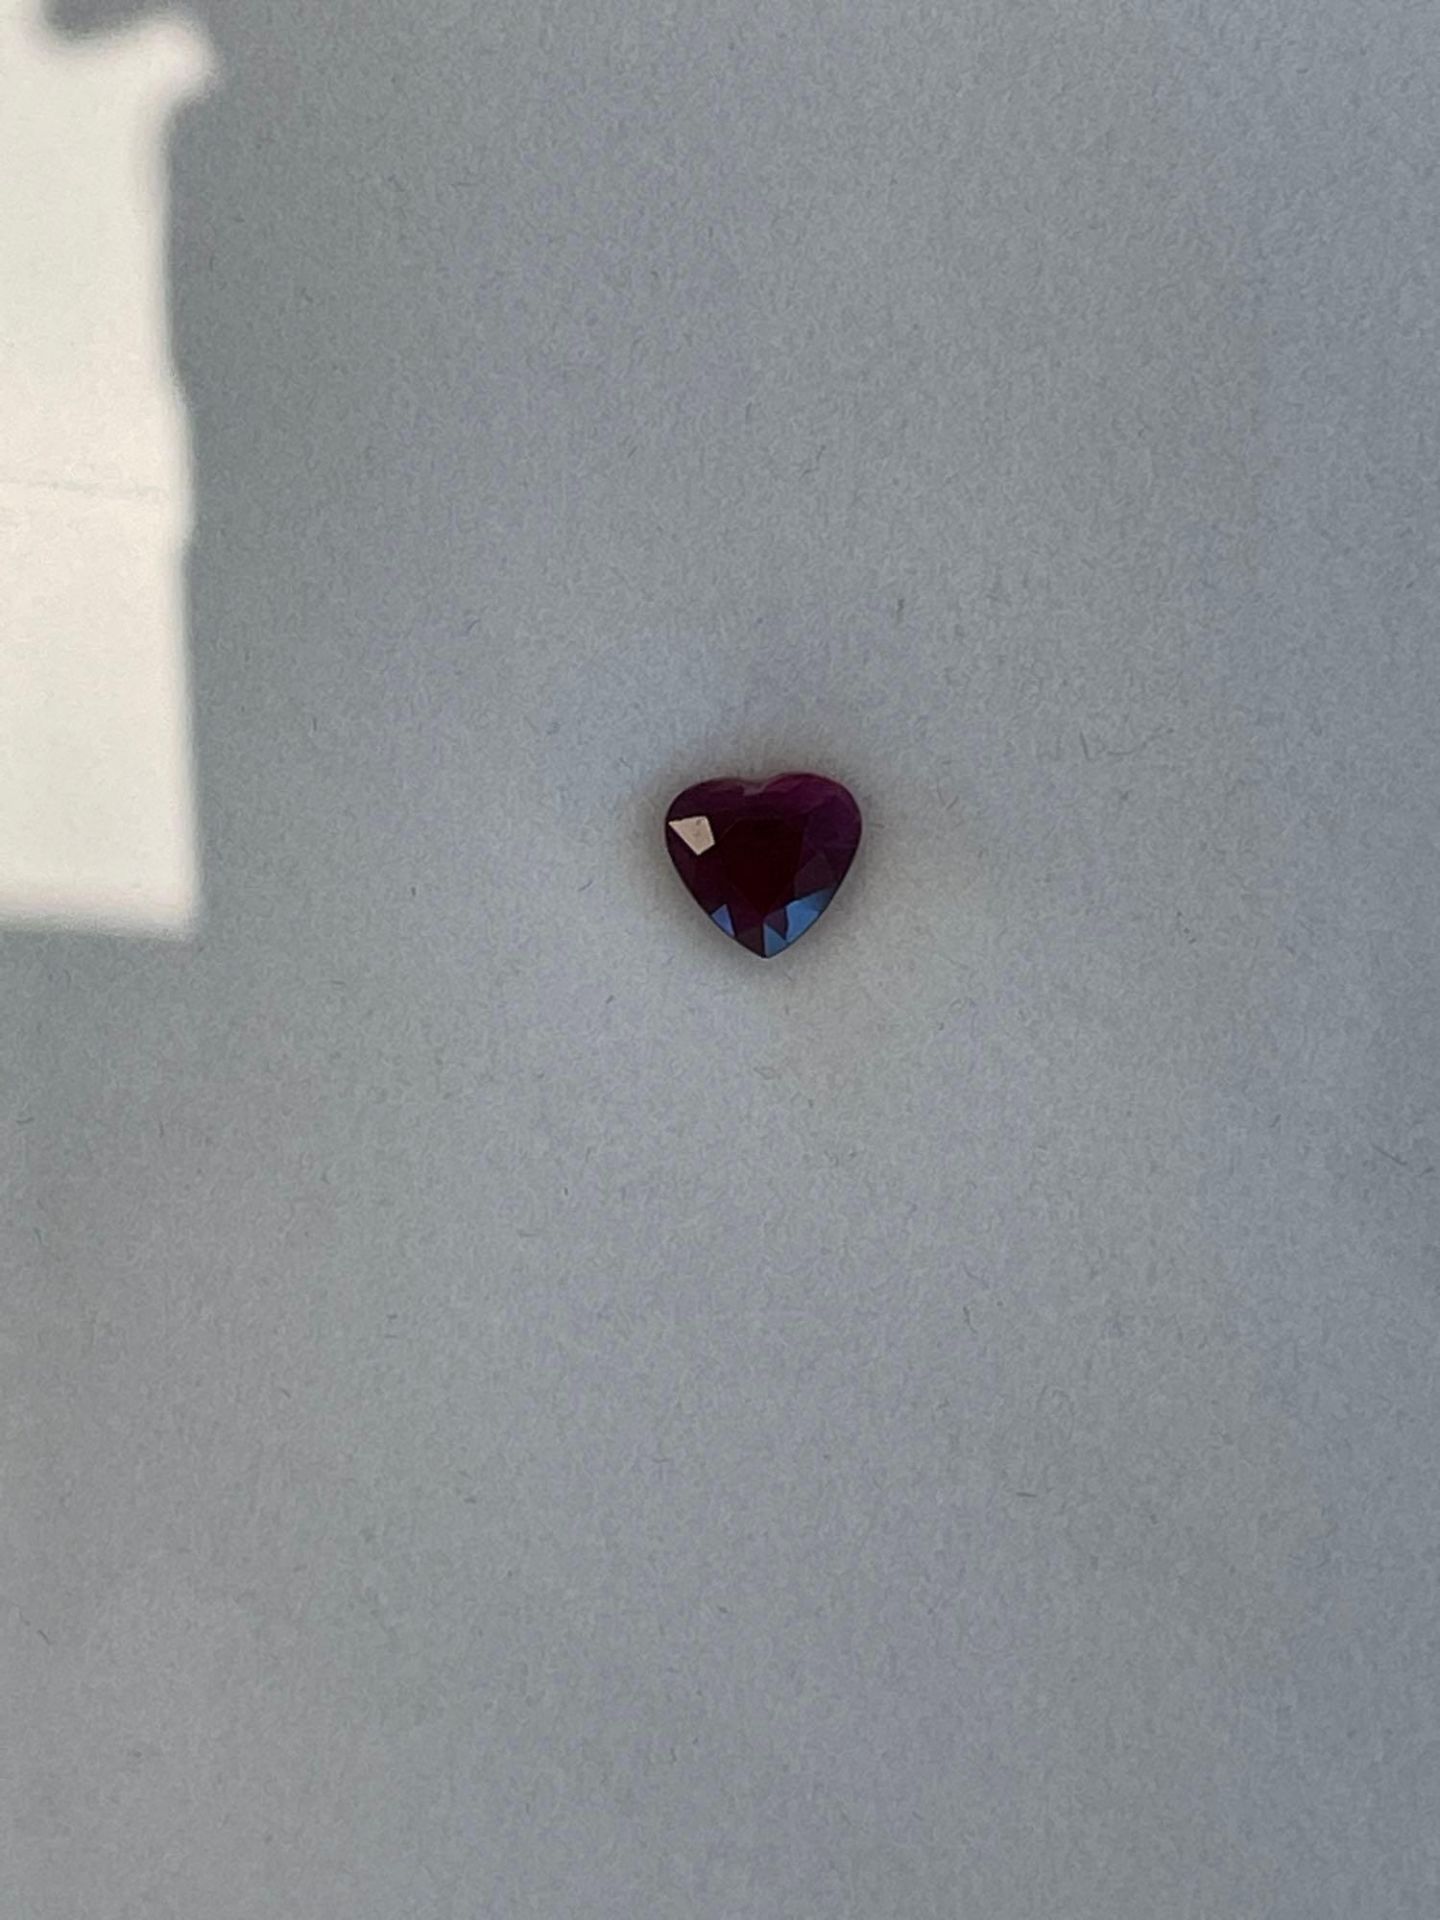 Jewelry; Burmese Heart Ruby 1.18cts, Ruby Parcel loose stones 18cts, Ruby parcel loose stoones 27cts - Image 4 of 7